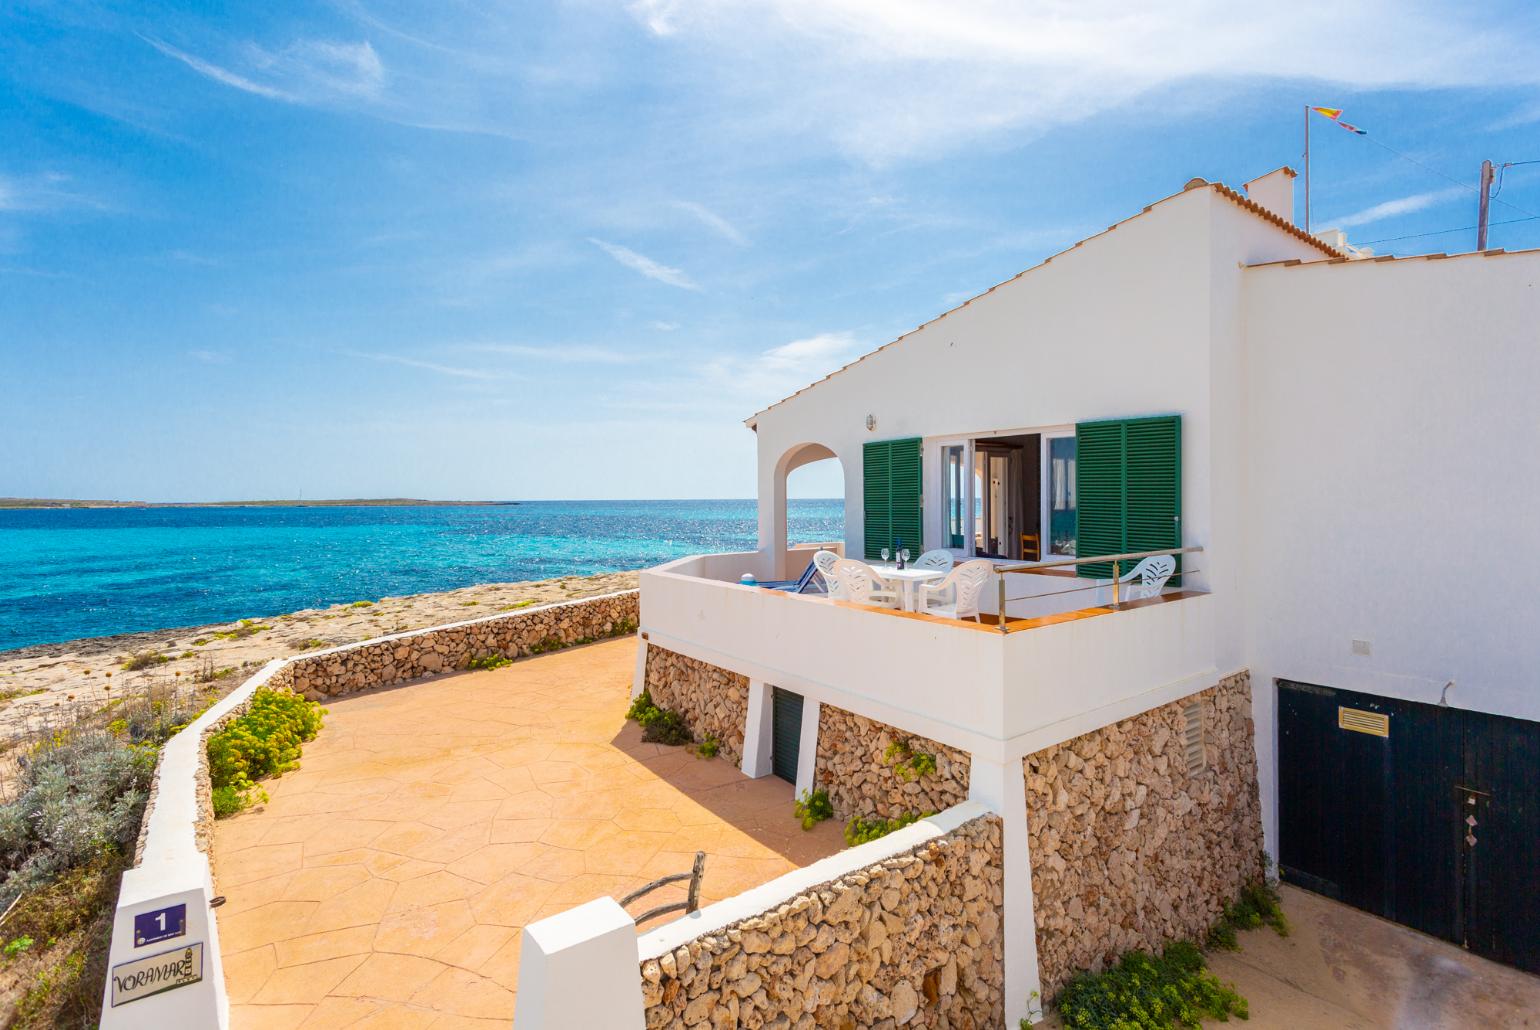 Beautiful seafront villa with private terraces and panoramic sea views